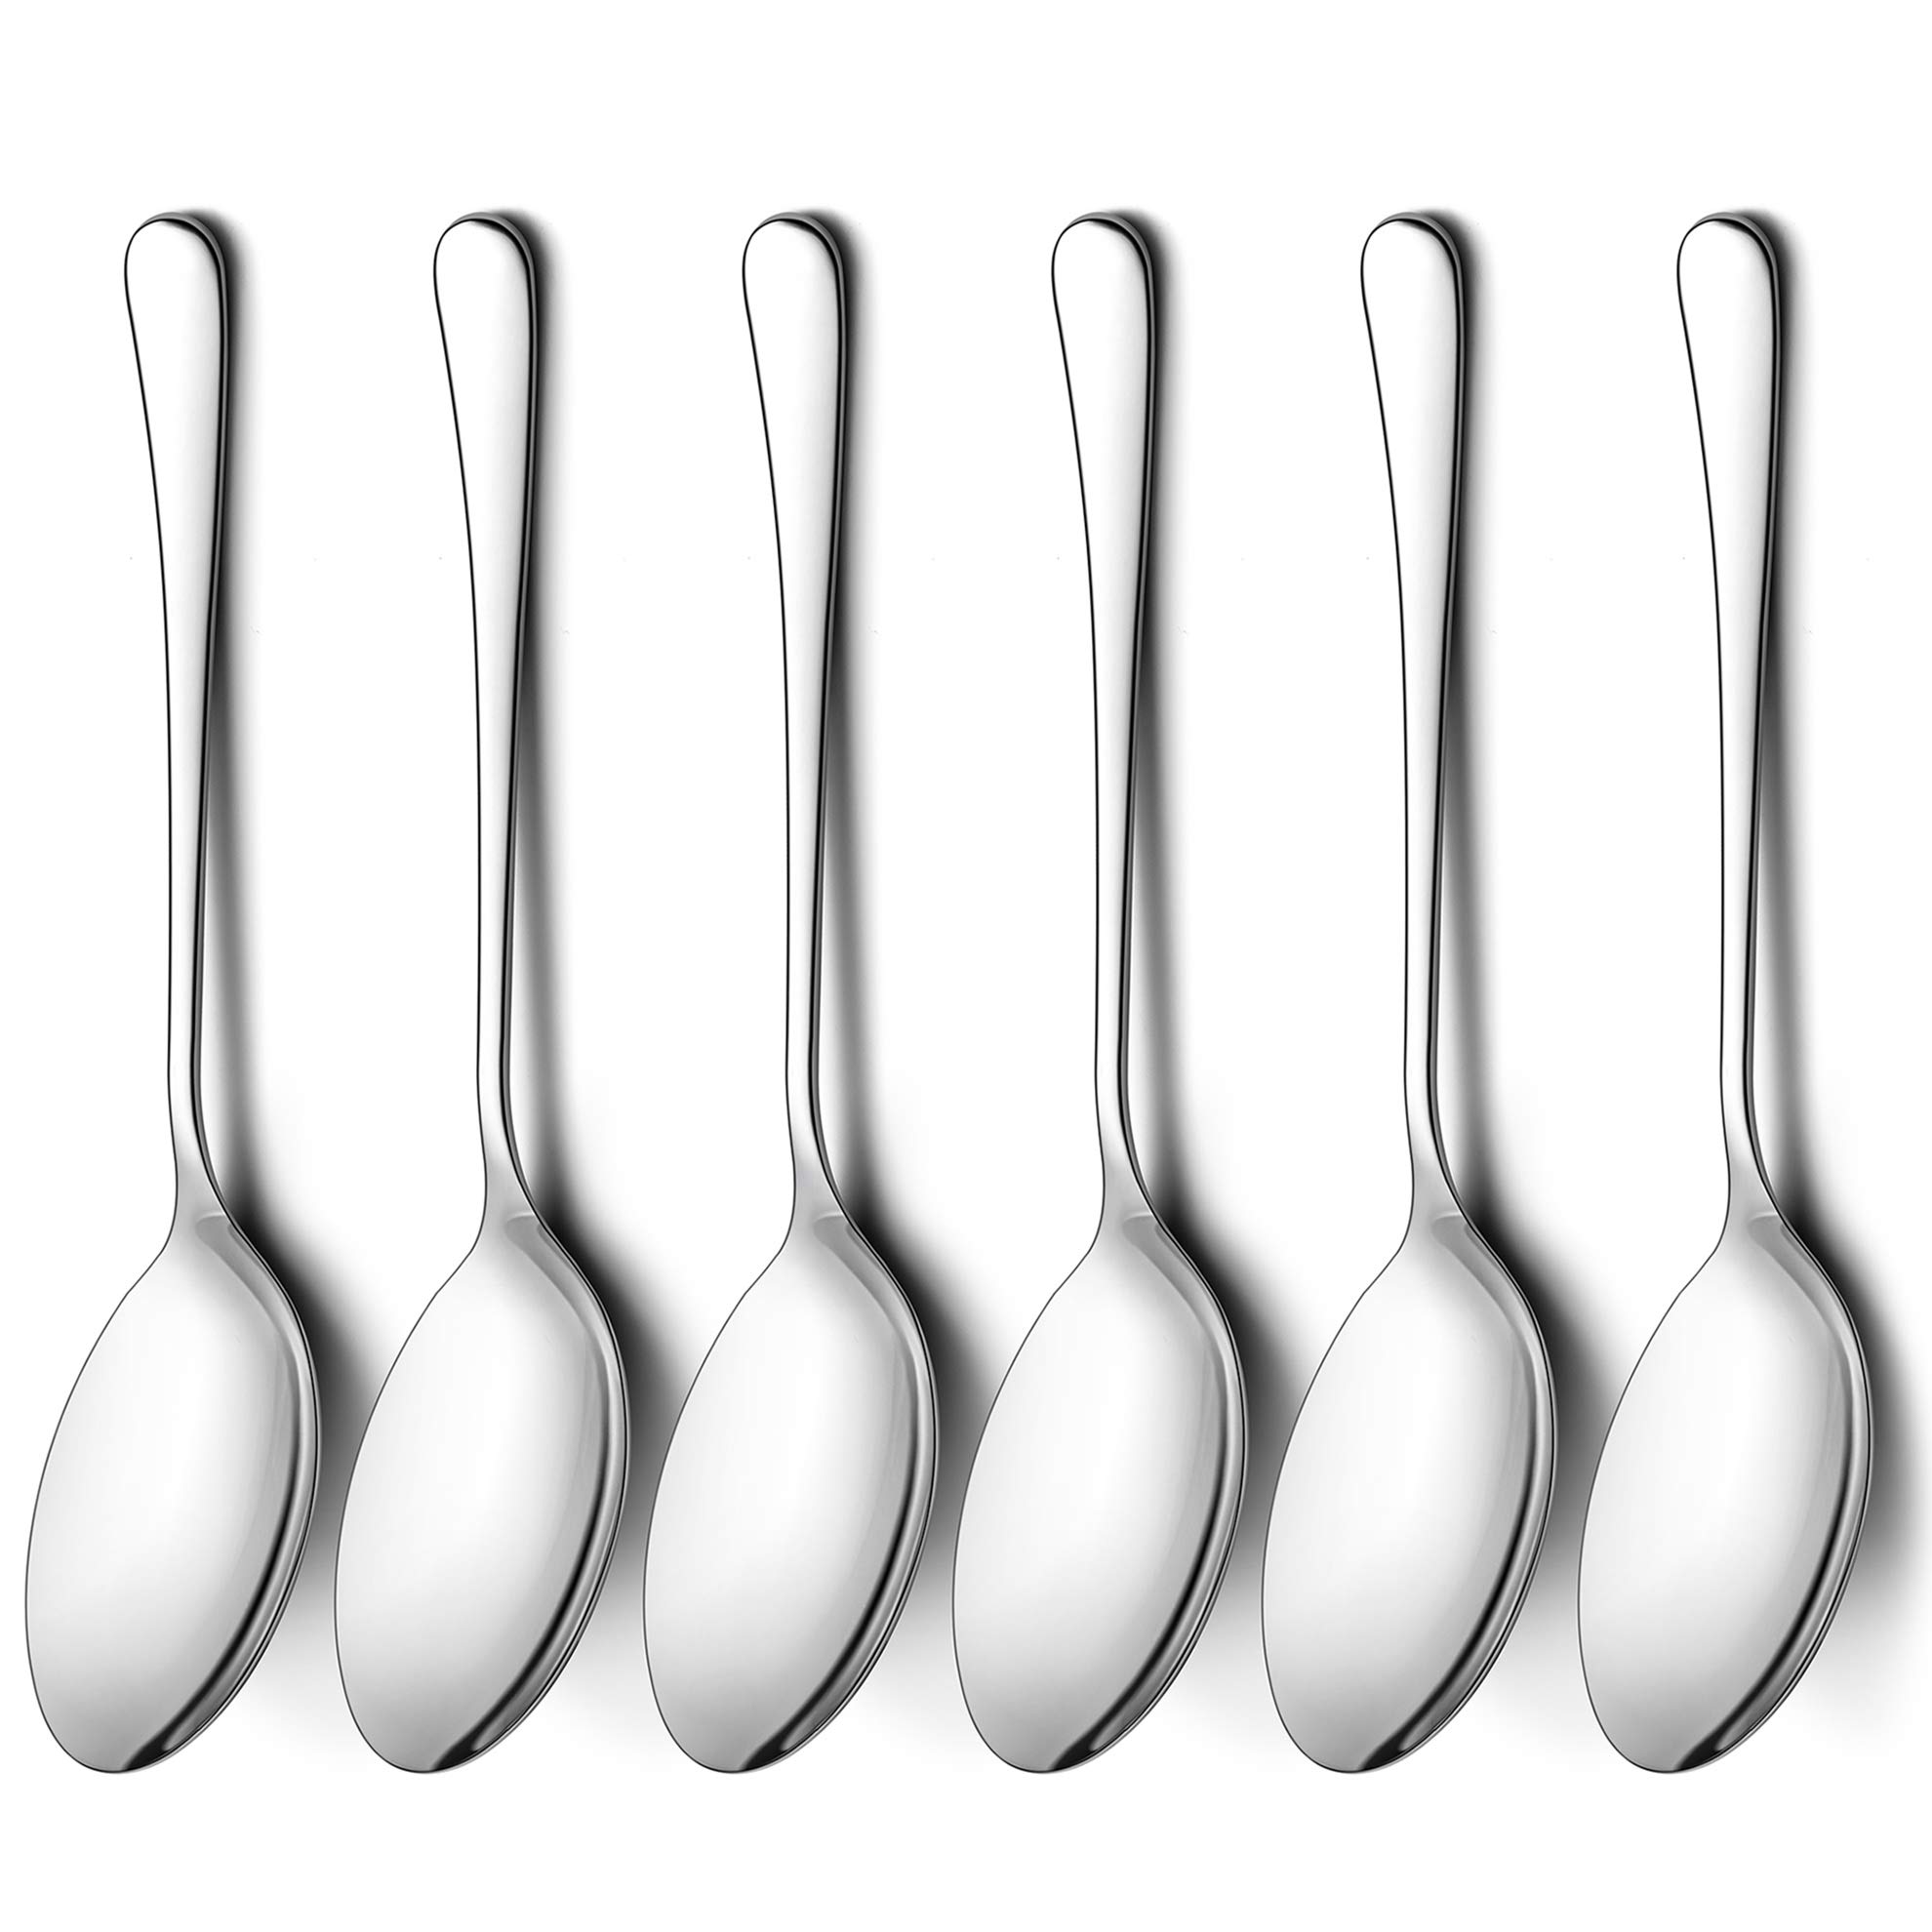 LIANYU Serving Spoon Set of 6, 9.8 Inch Stainless Steel Large Dinner Buffet Catering Banquet Serving Spoons, Mirror Finish, Dishwasher Safe